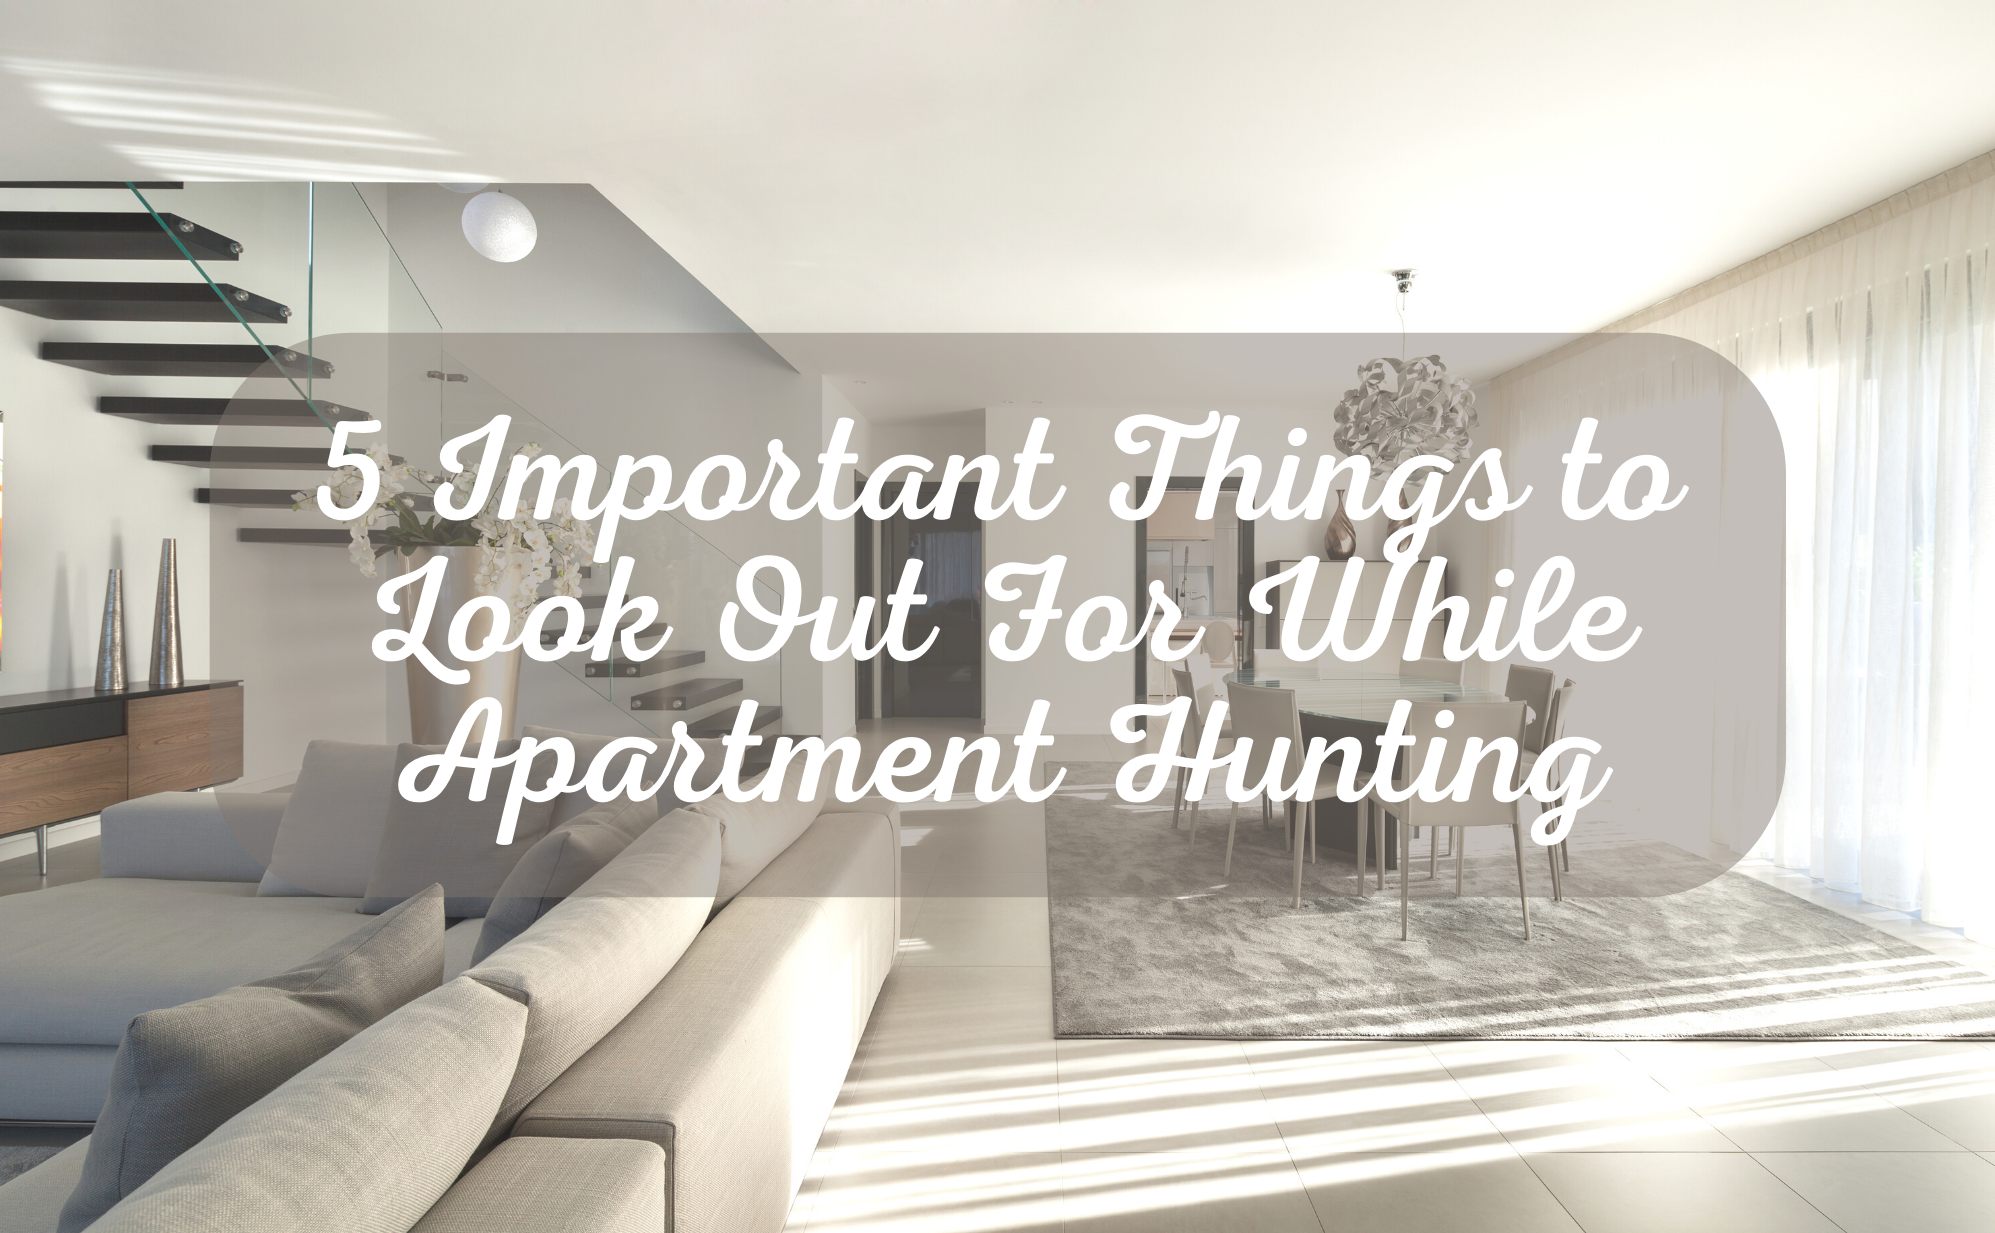 5 Important Things to Look Out For While Apartment Hunting